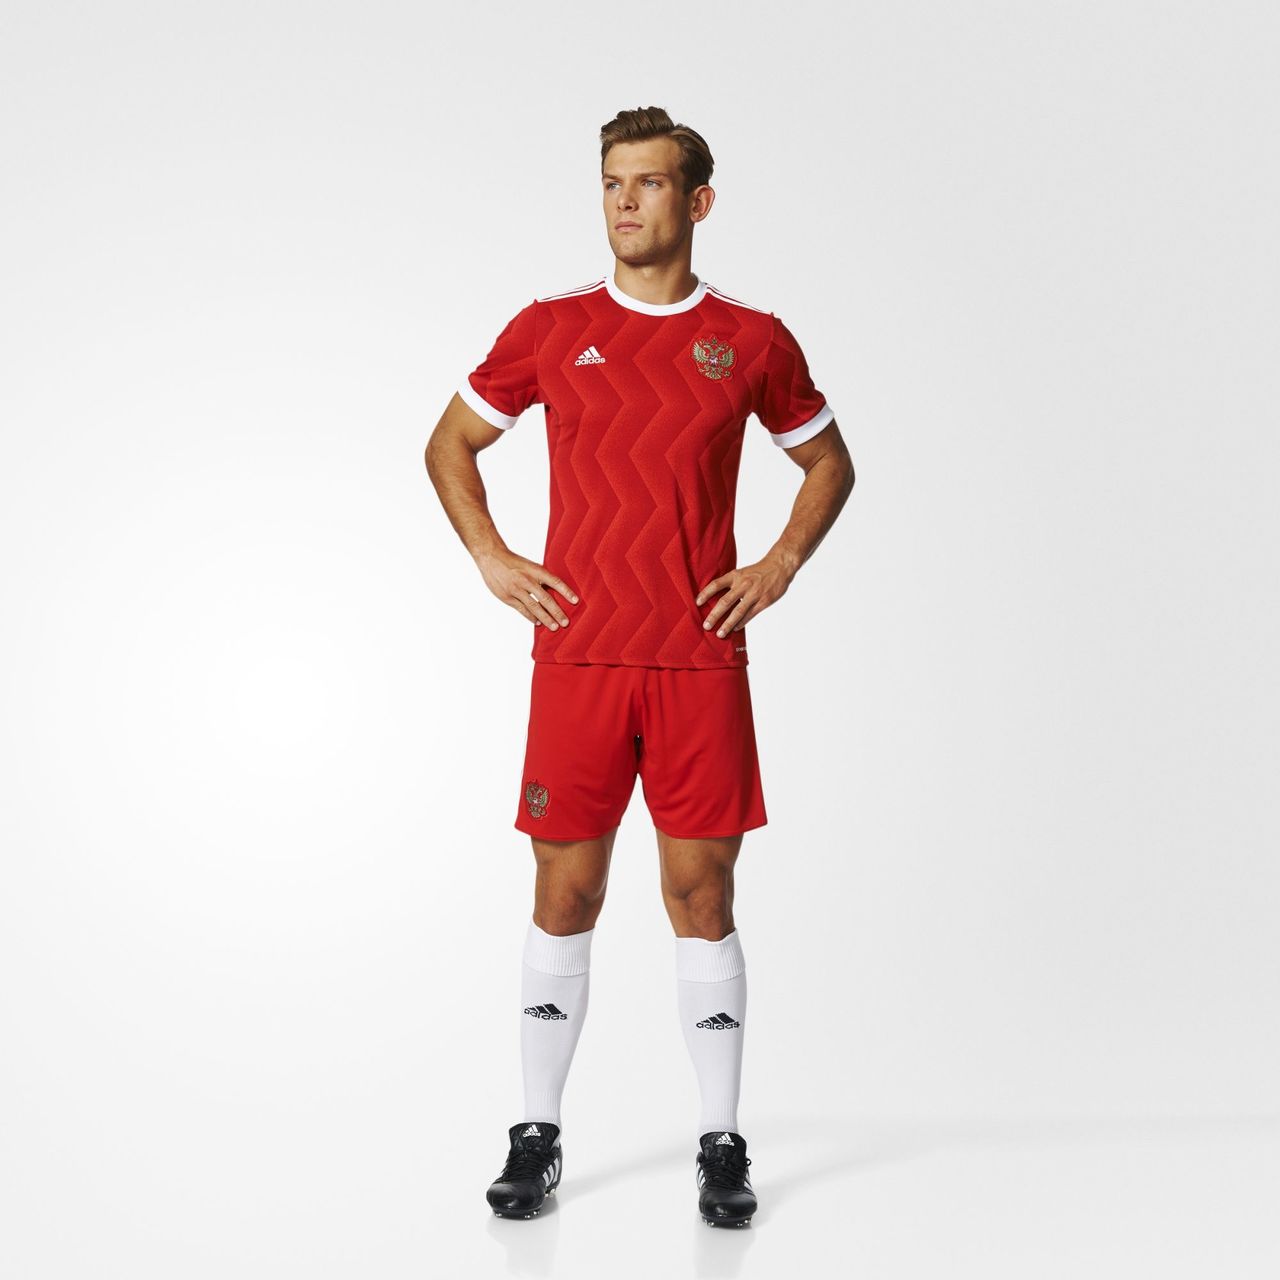 russia_2017_confederations_cup_adidas_home_kit_shirt_f.jpg